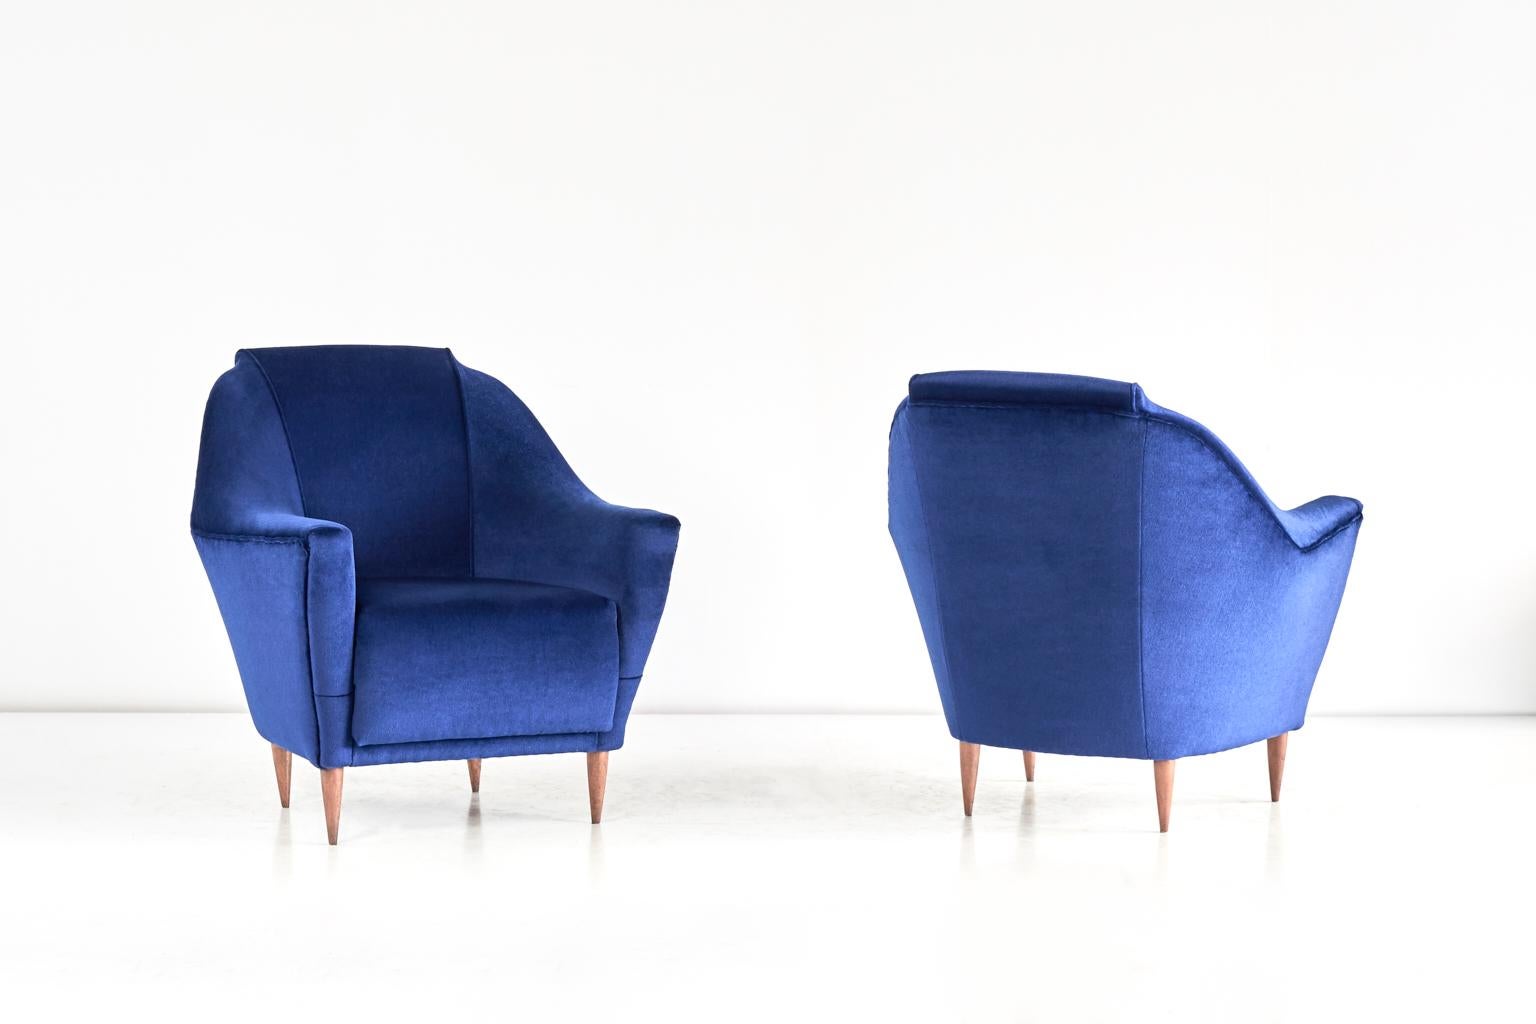 Pair of Ico Parisi Armchairs in Blue Velvet for Ariberto Colombo, Italy, 1951 For Sale 2